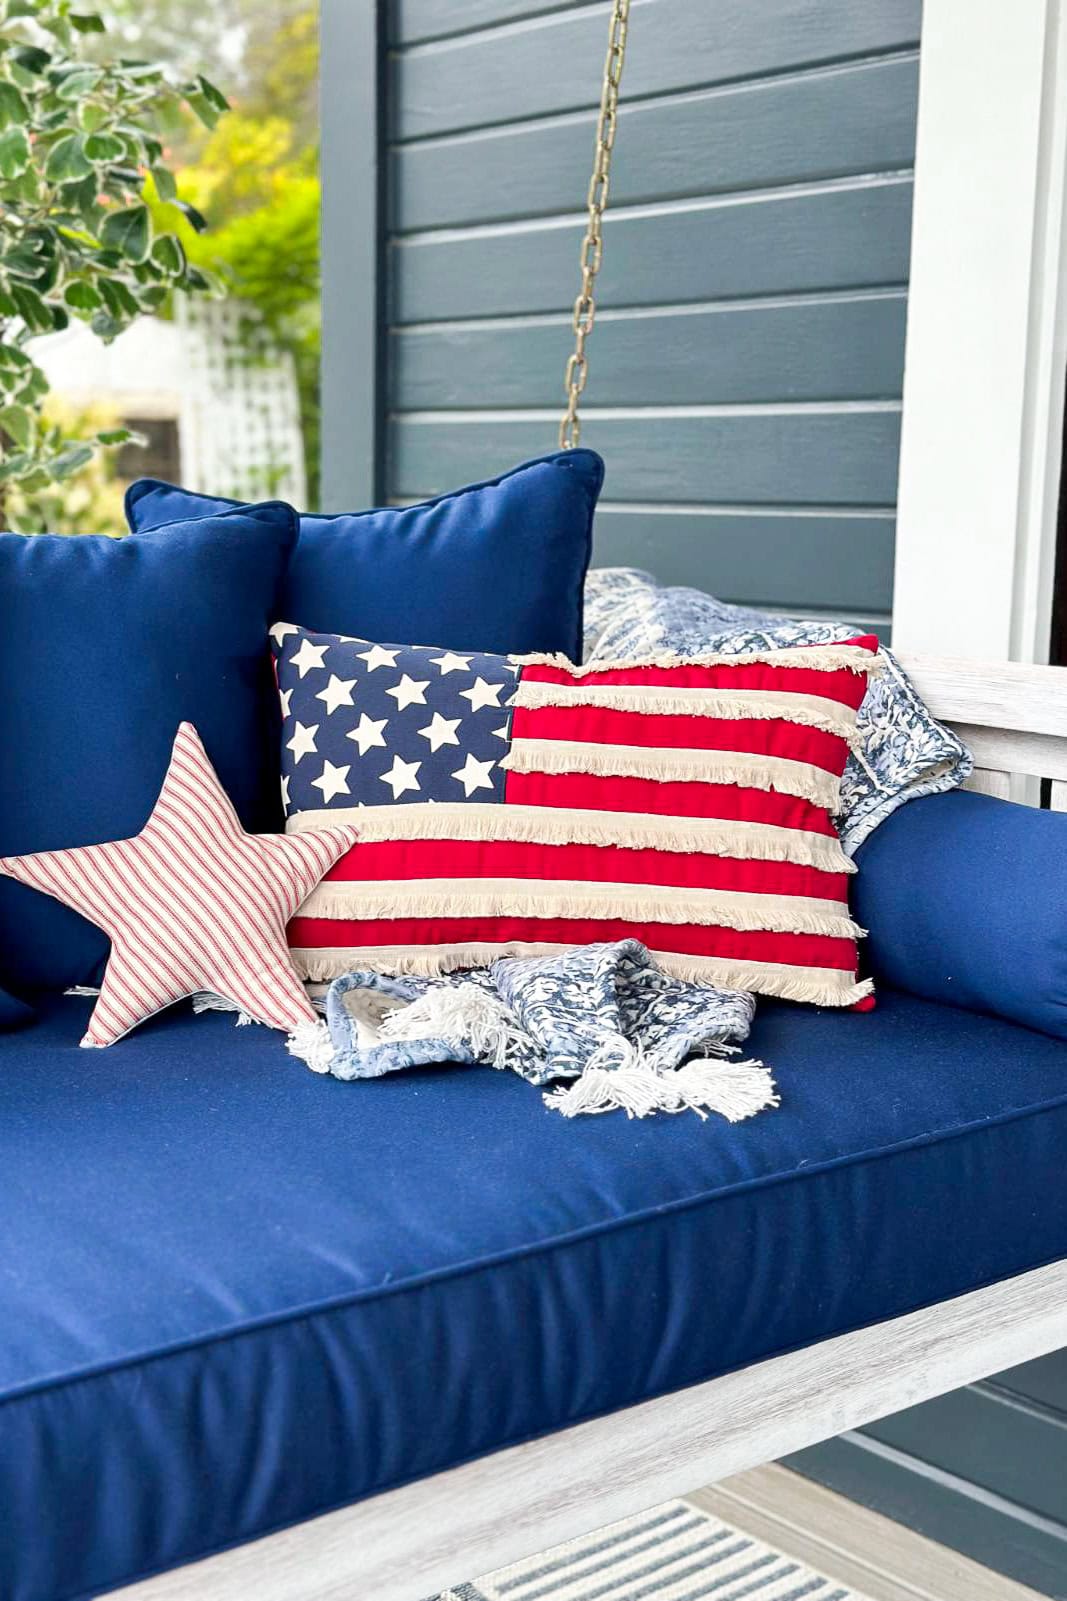 Decorating with American Flag pillows on a front porch swing